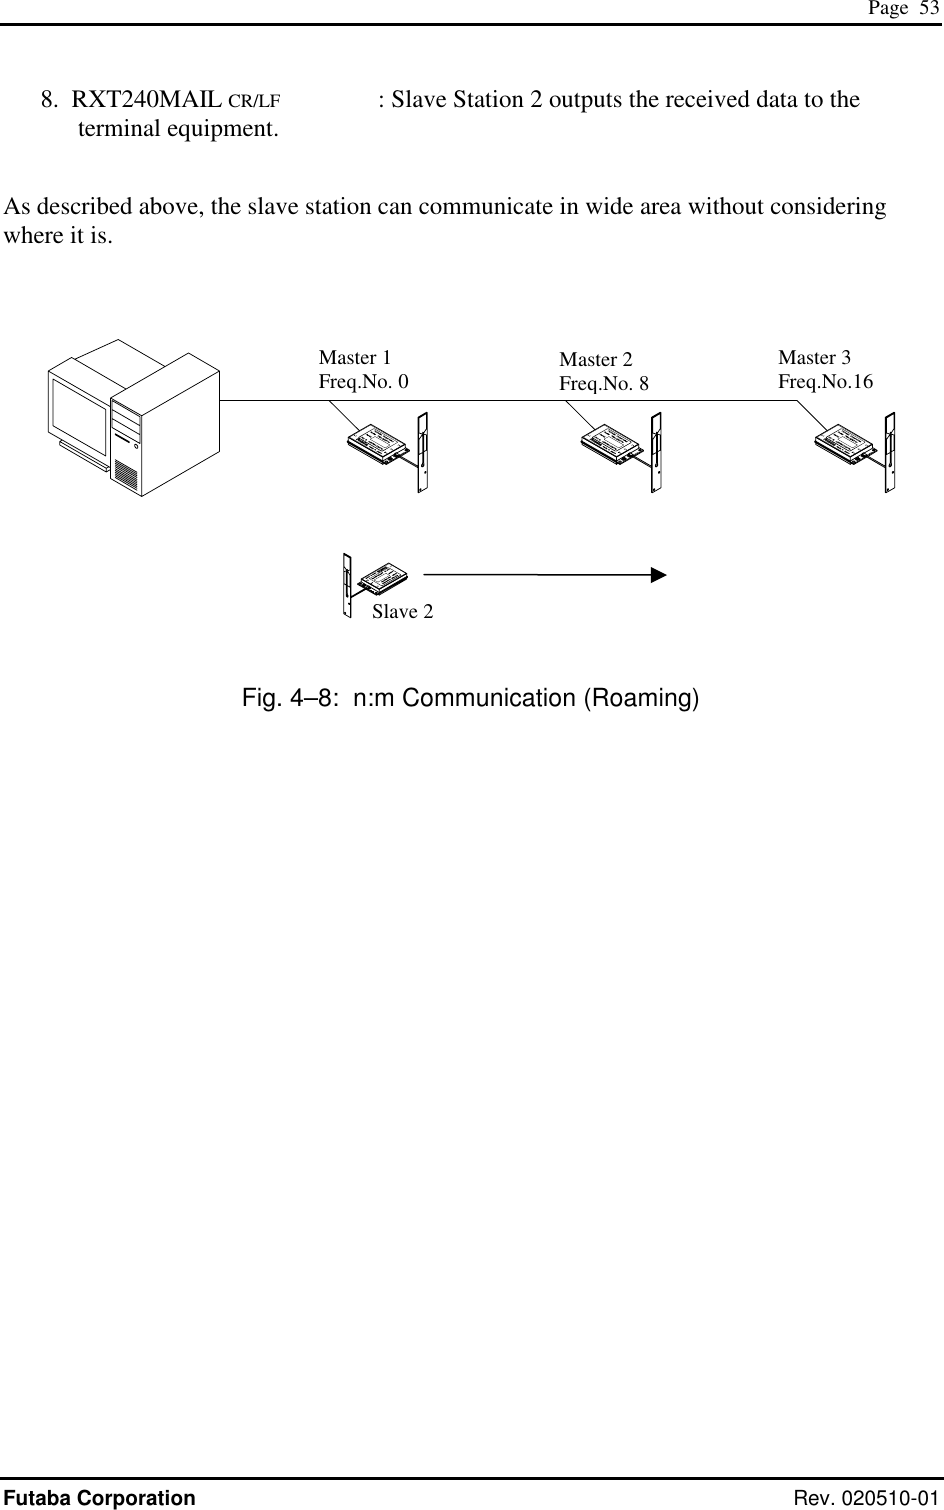  Page  53 Futaba Corporation Rev. 020510-01 8.  RXT240MAIL CR/LF    : Slave Station 2 outputs the received data to the terminal equipment.  As described above, the slave station can communicate in wide area without considering where it is.  Fig. 4–8:  n:m Communication (Roaming) Master 1 Freq.No. 0  Master 2 Freq.No. 8 Master 3 Freq.No.16 Slave 2 